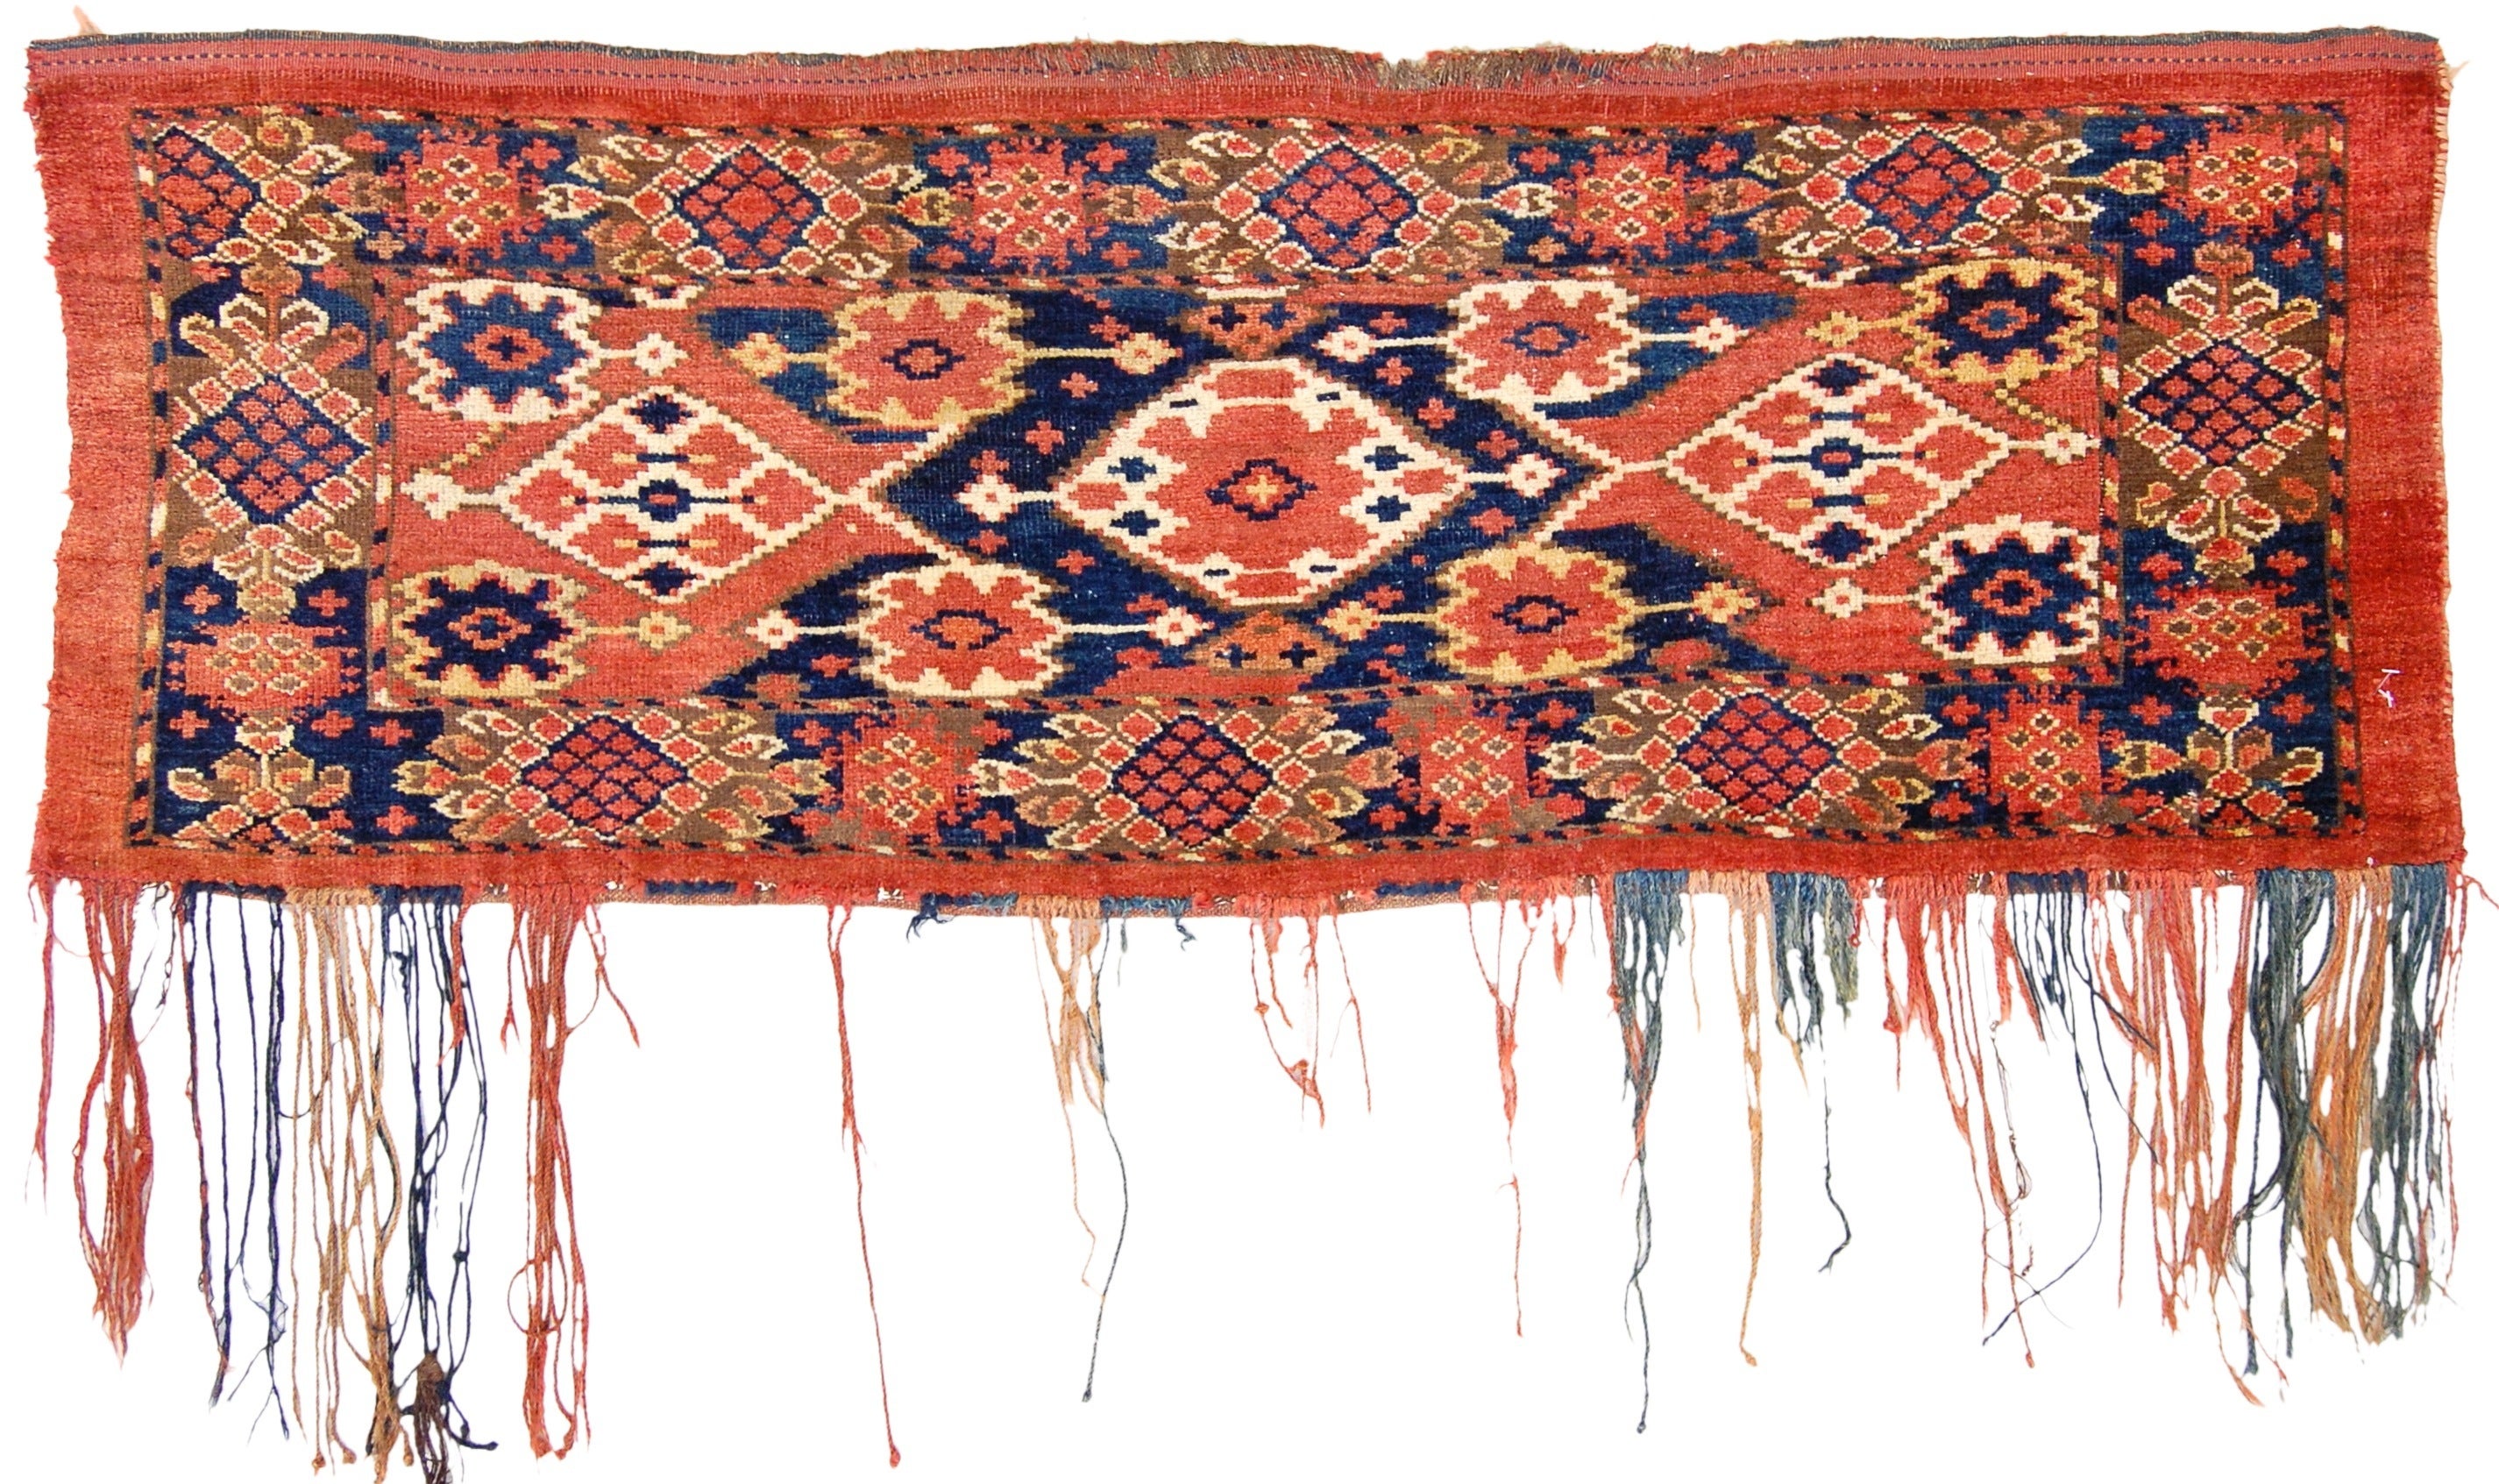 Late 19th Century Red and Blue Bashir Torba Bag Rug